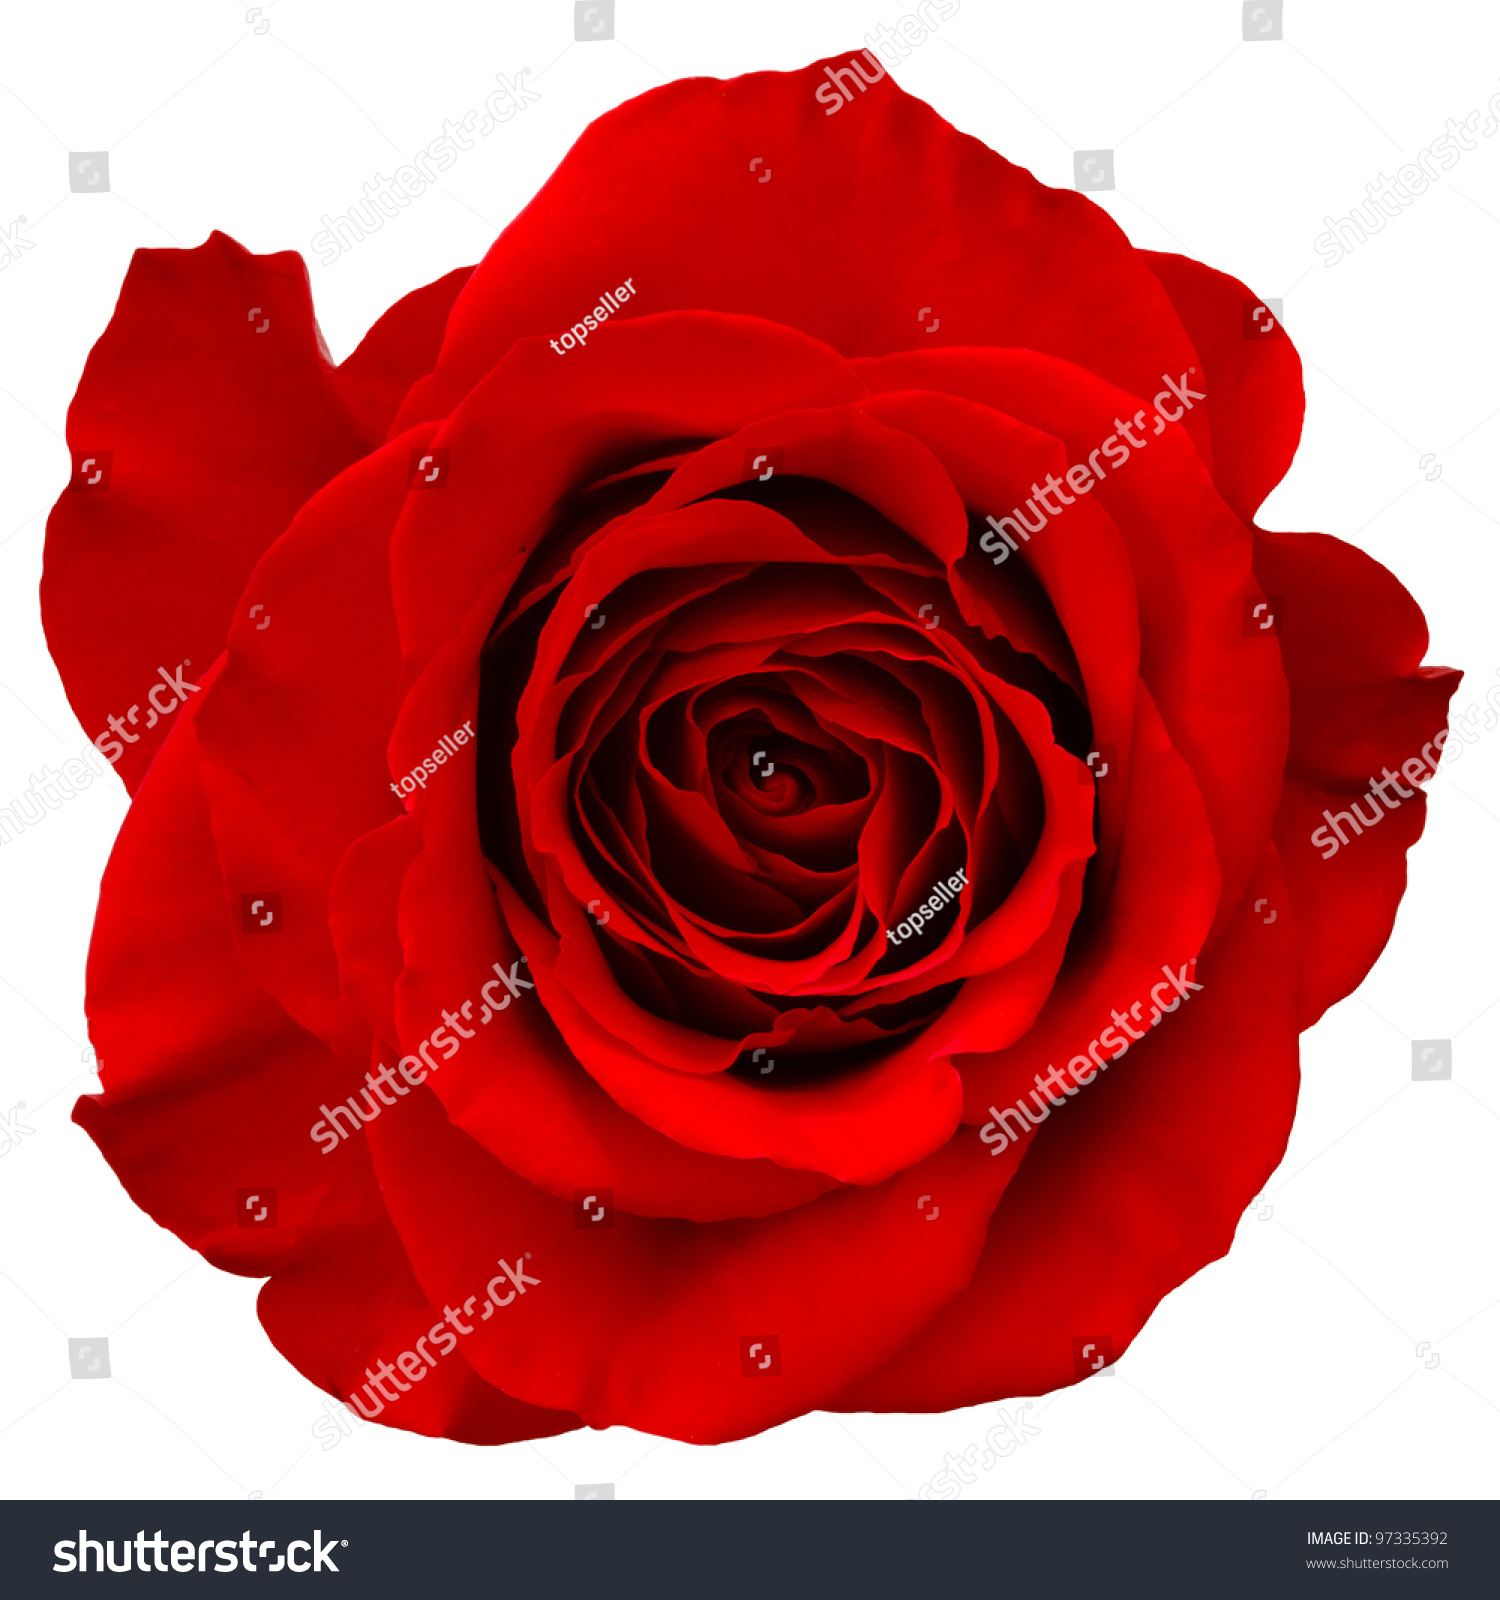 White And Red Rose Name